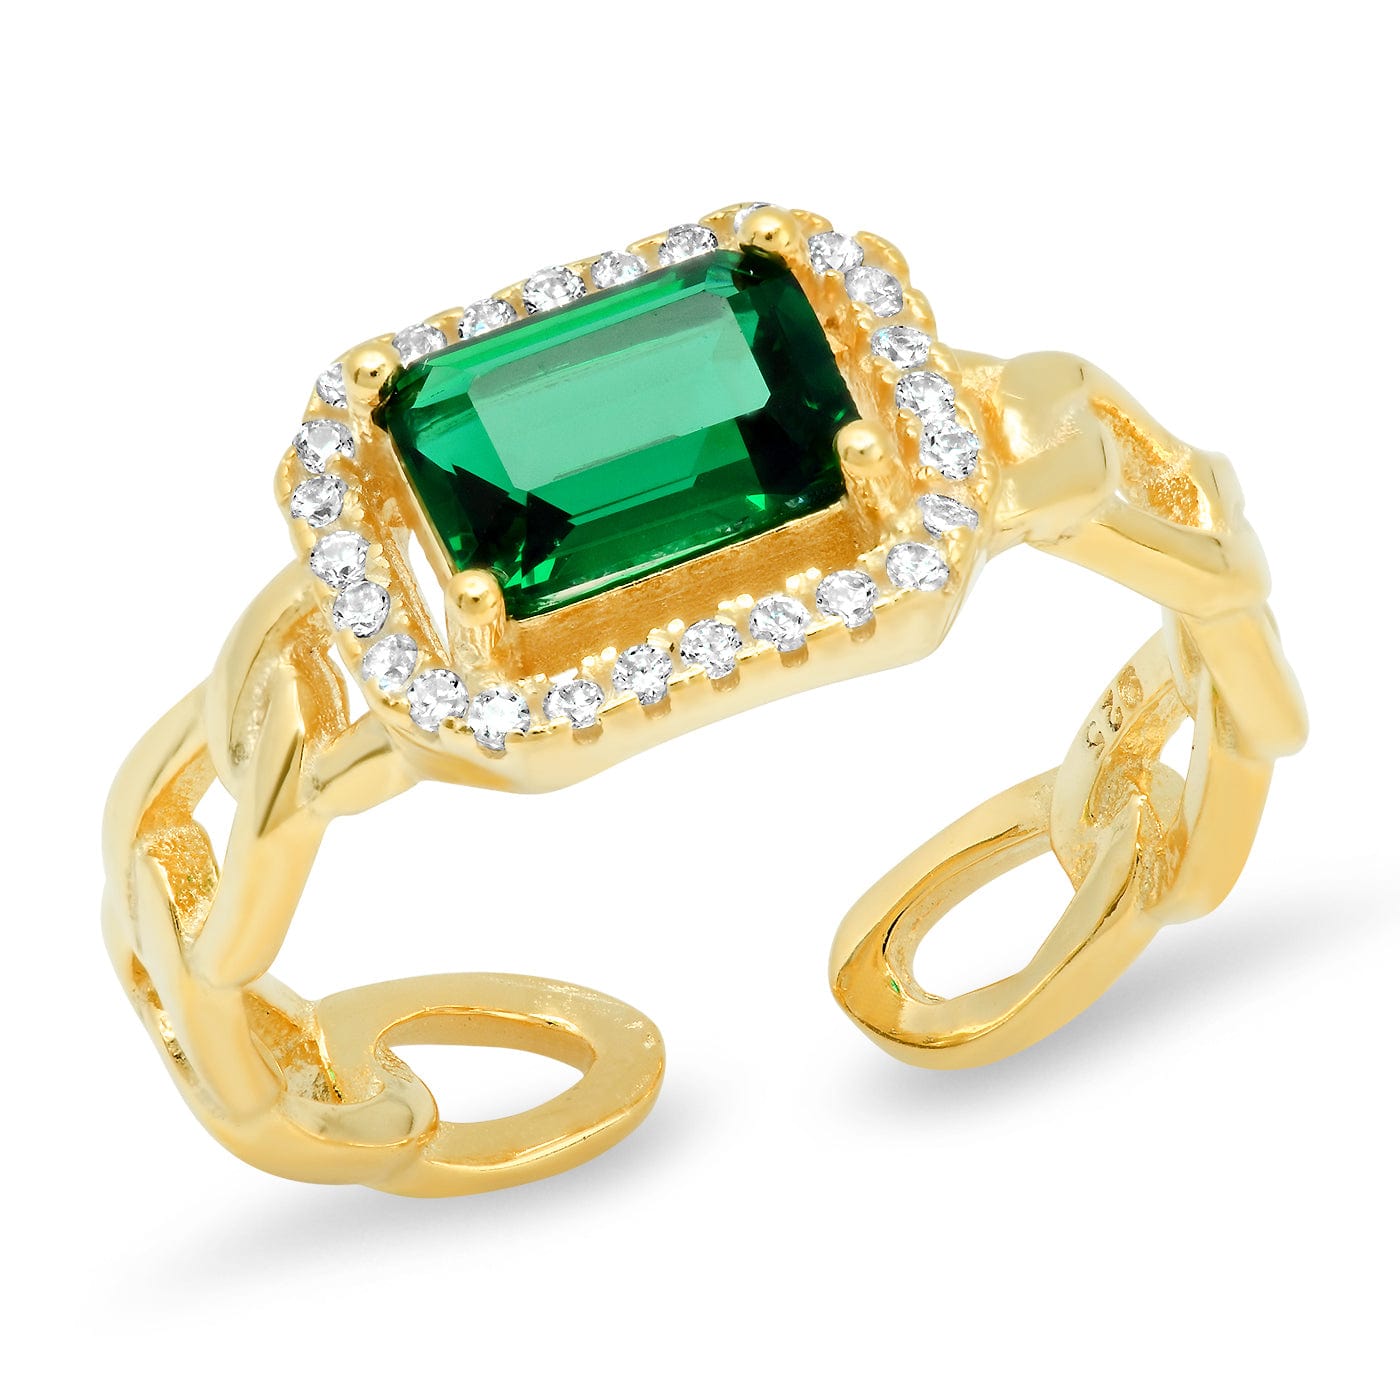 TAI JEWELRY Rings 6 / Gold/Emerald East West Ring